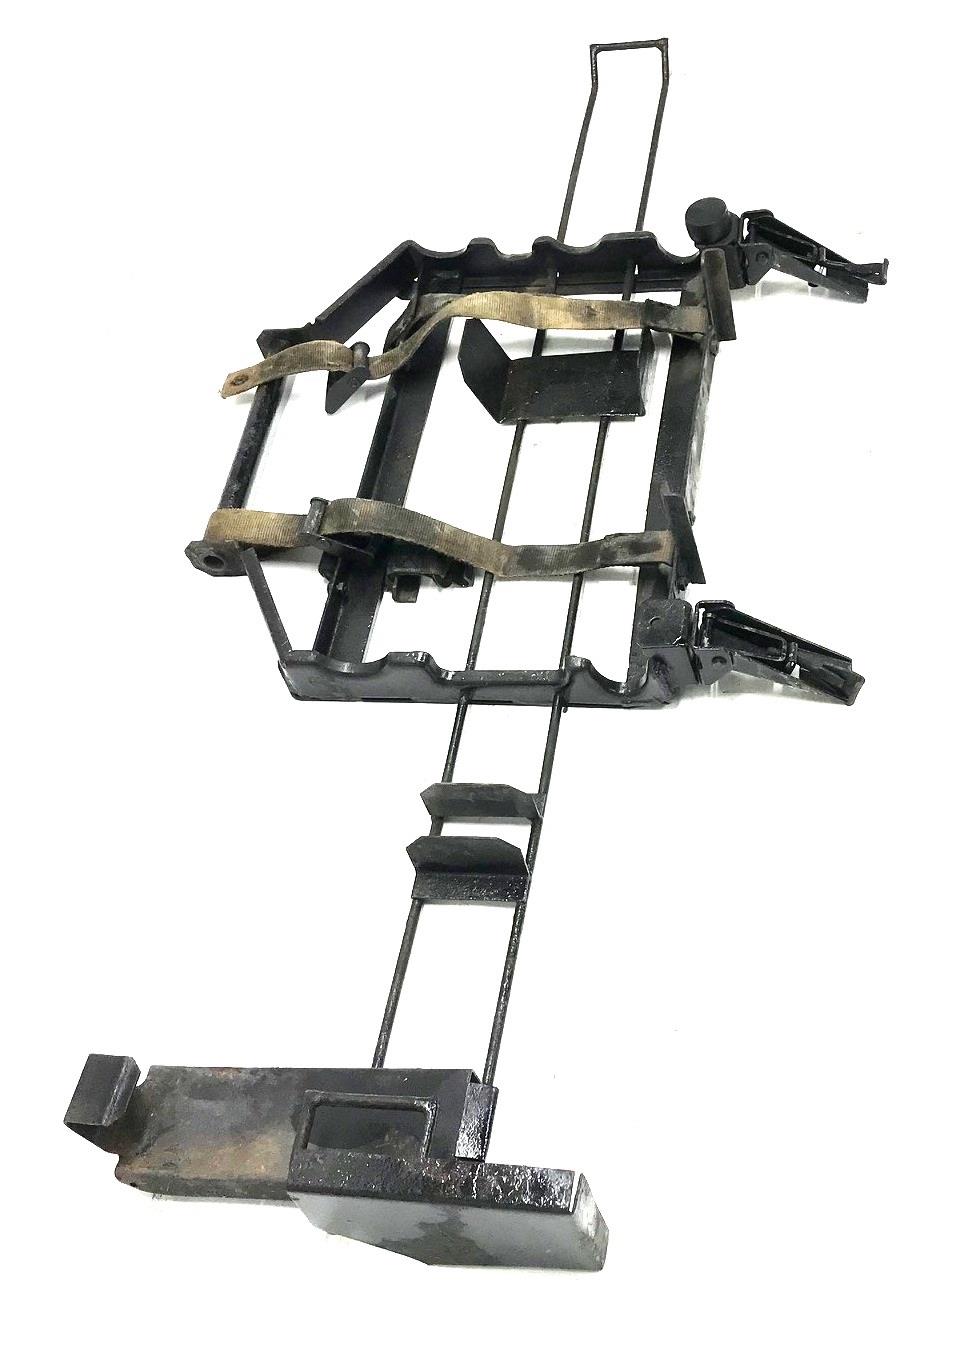 HM-1330 | HM-1330  Pioneer Stowage Tool Tray  Rack with Straight Mounting Clamps Assembly With BII Kit HMMWV (13).jpg